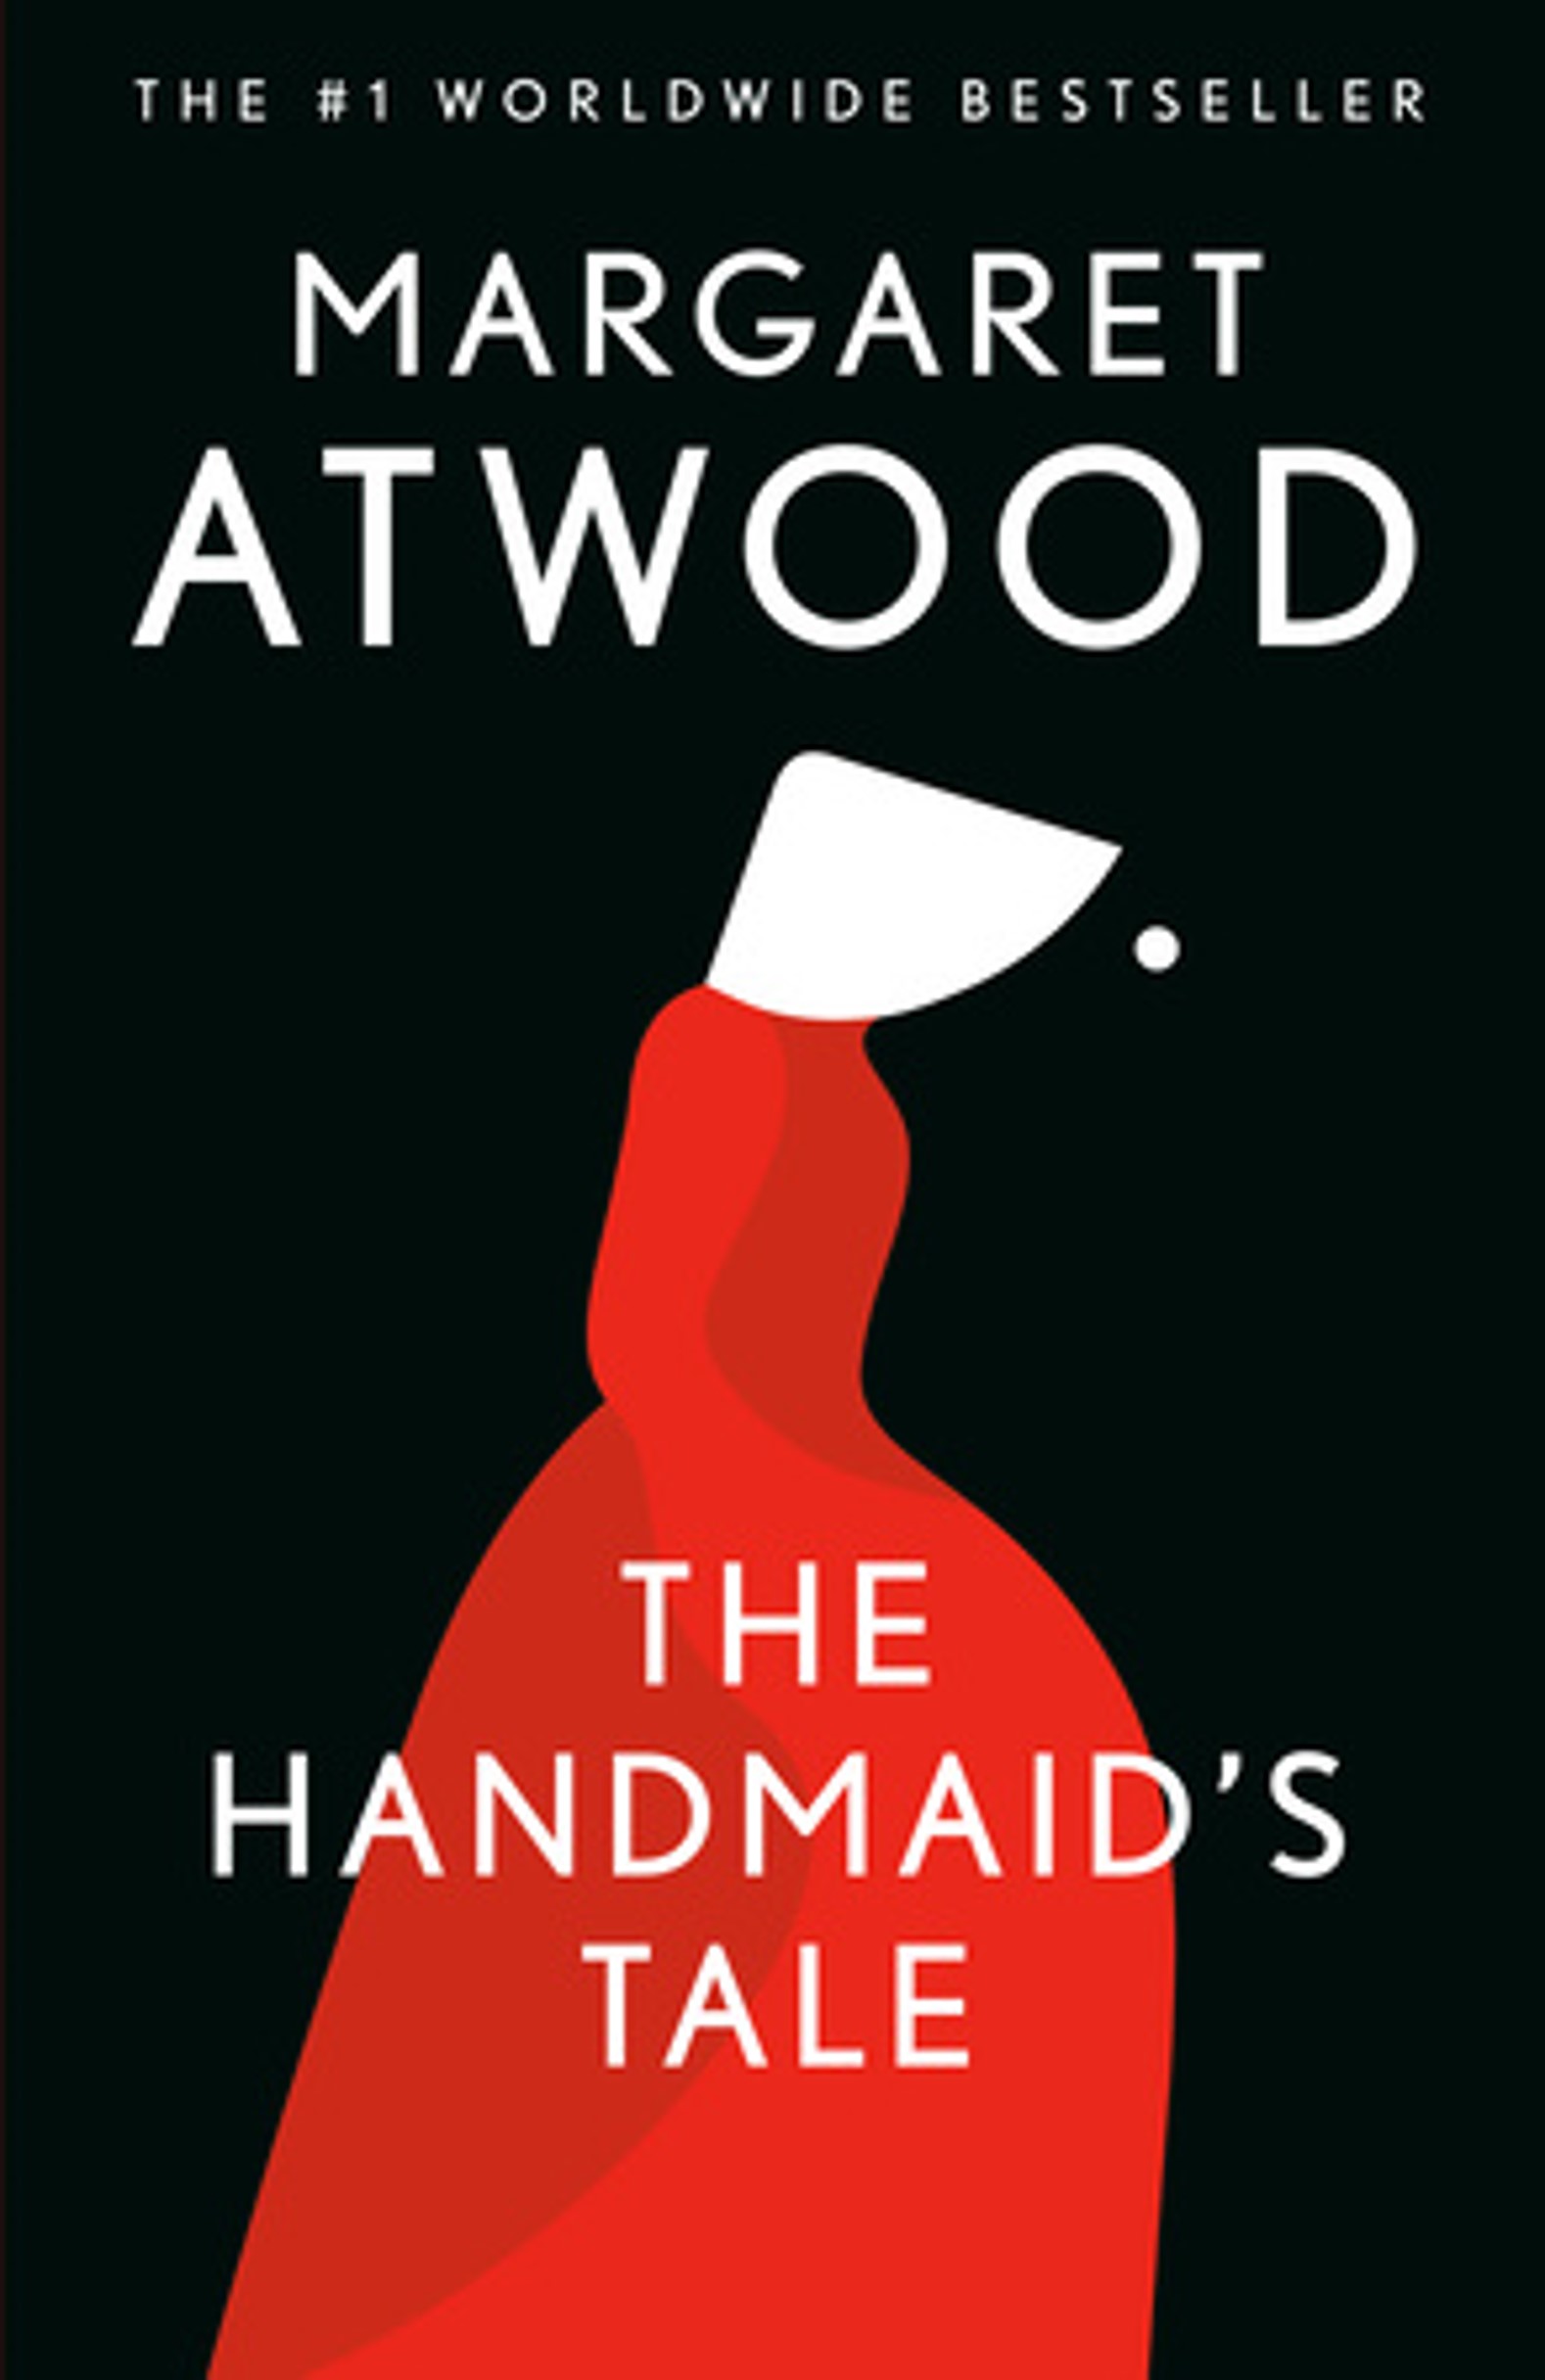 Book cover of The Handmaid's Tale.